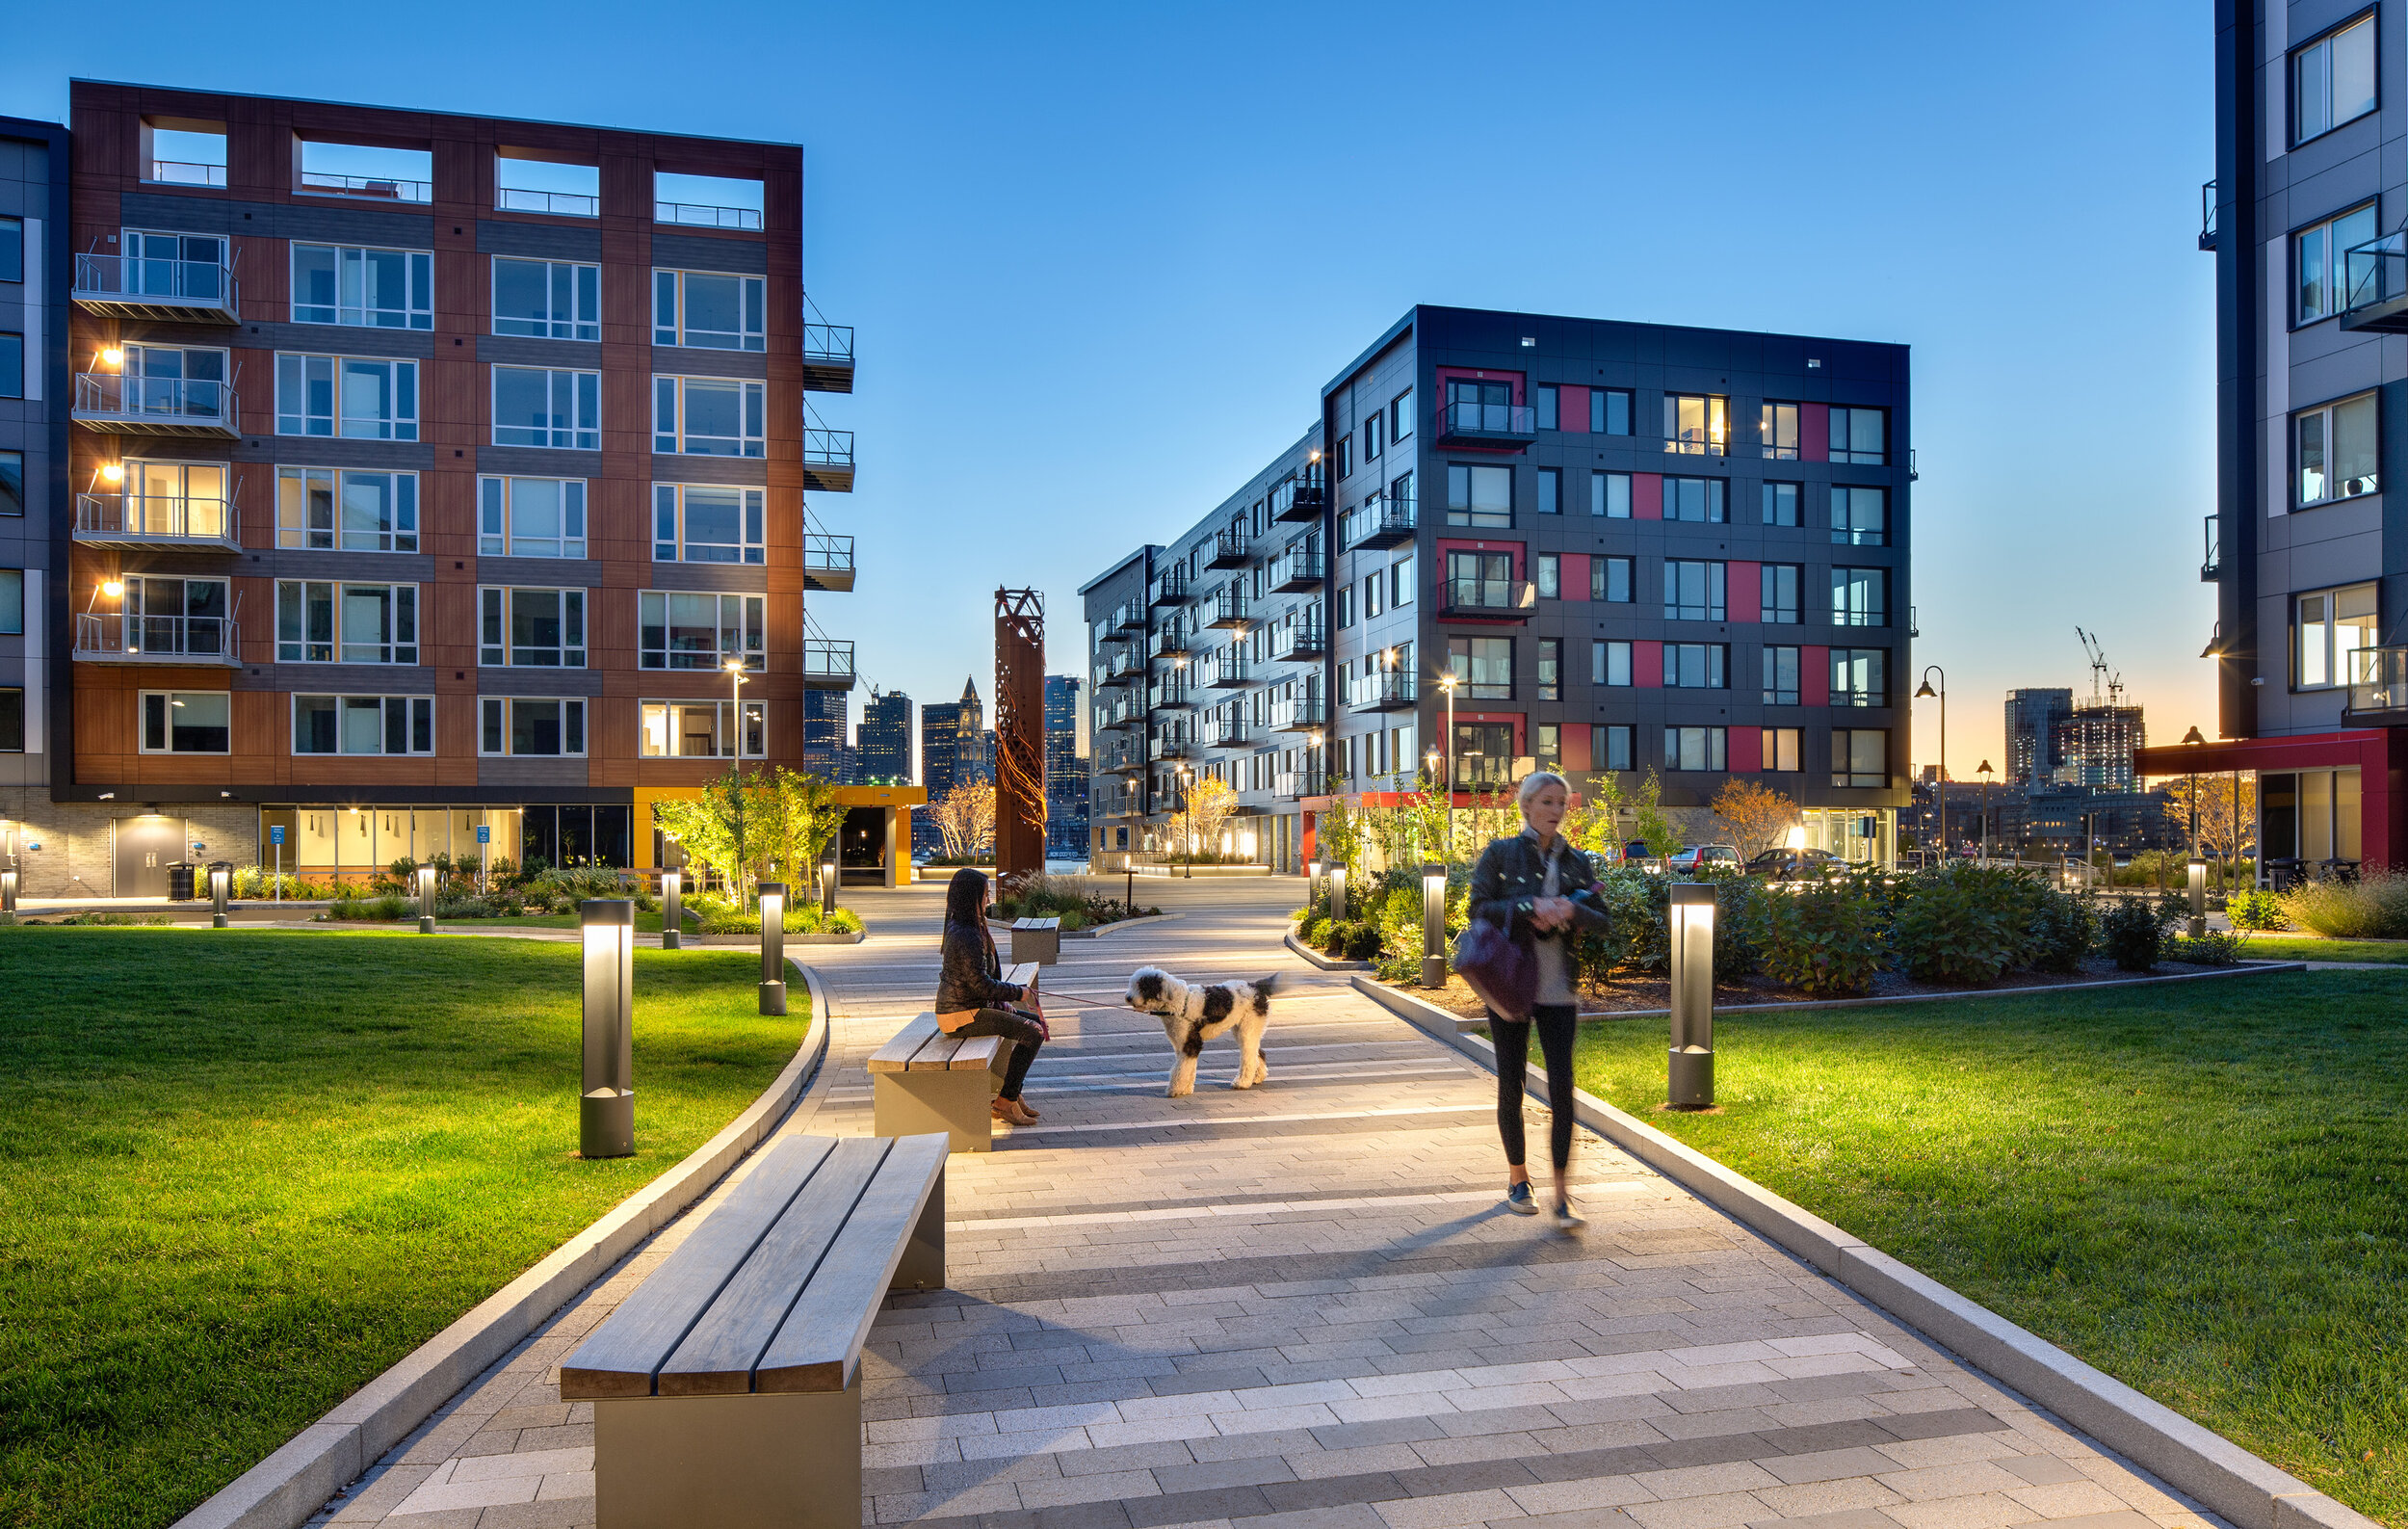  Evening view of Clippership Wharf Courtyard (Photo by Ed Wonsek) 